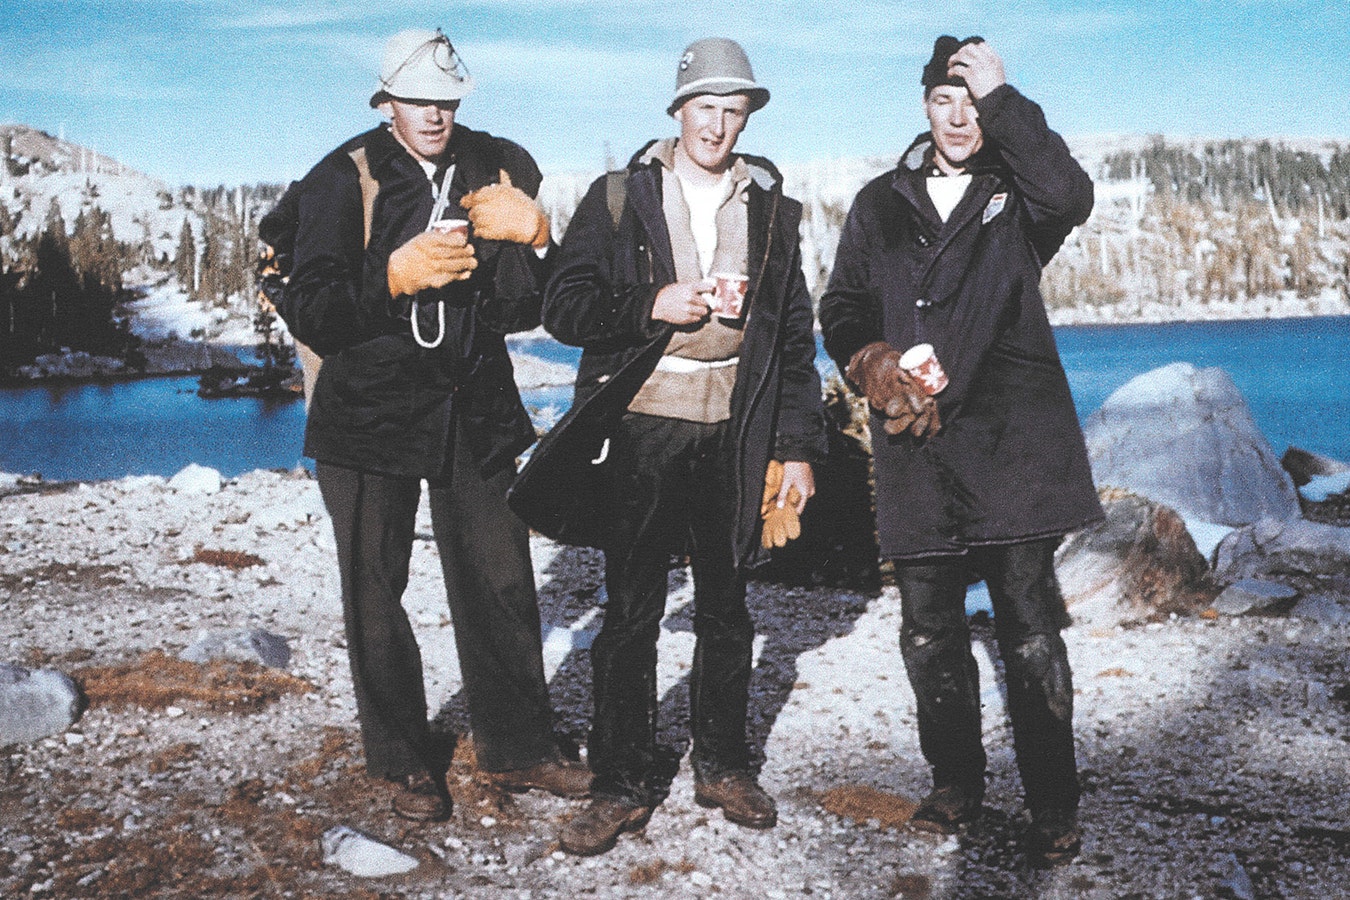 Three members of the University of Wyoming college student rescue team that served at Medicine Bow Peak in 1955 included Robert Harrower, left, Courtney Skinner and Diggs Lewis.